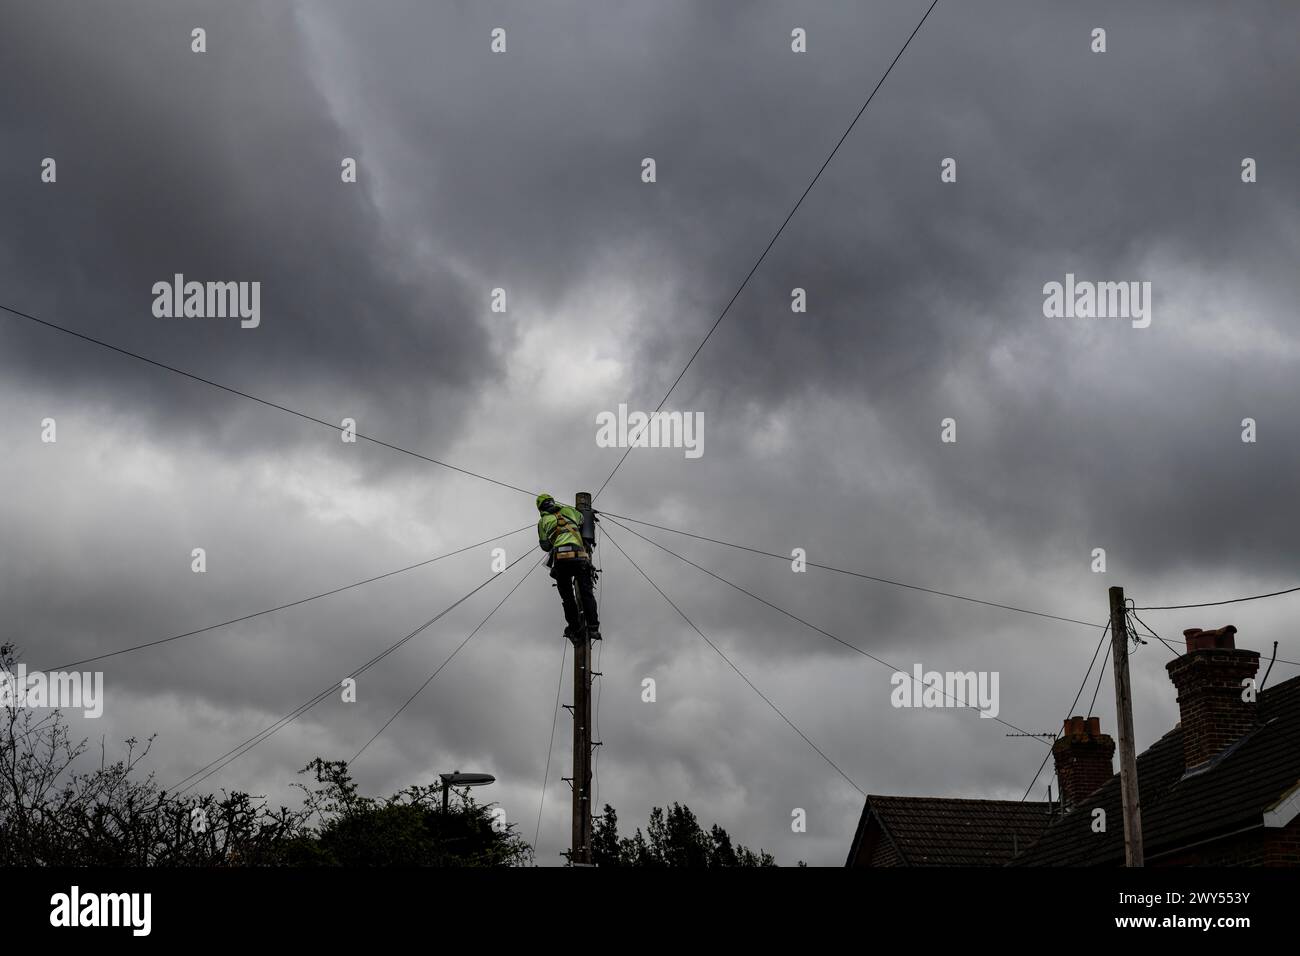 Worker, strapped onto Telegraph poll working on communication cables Stock Photo